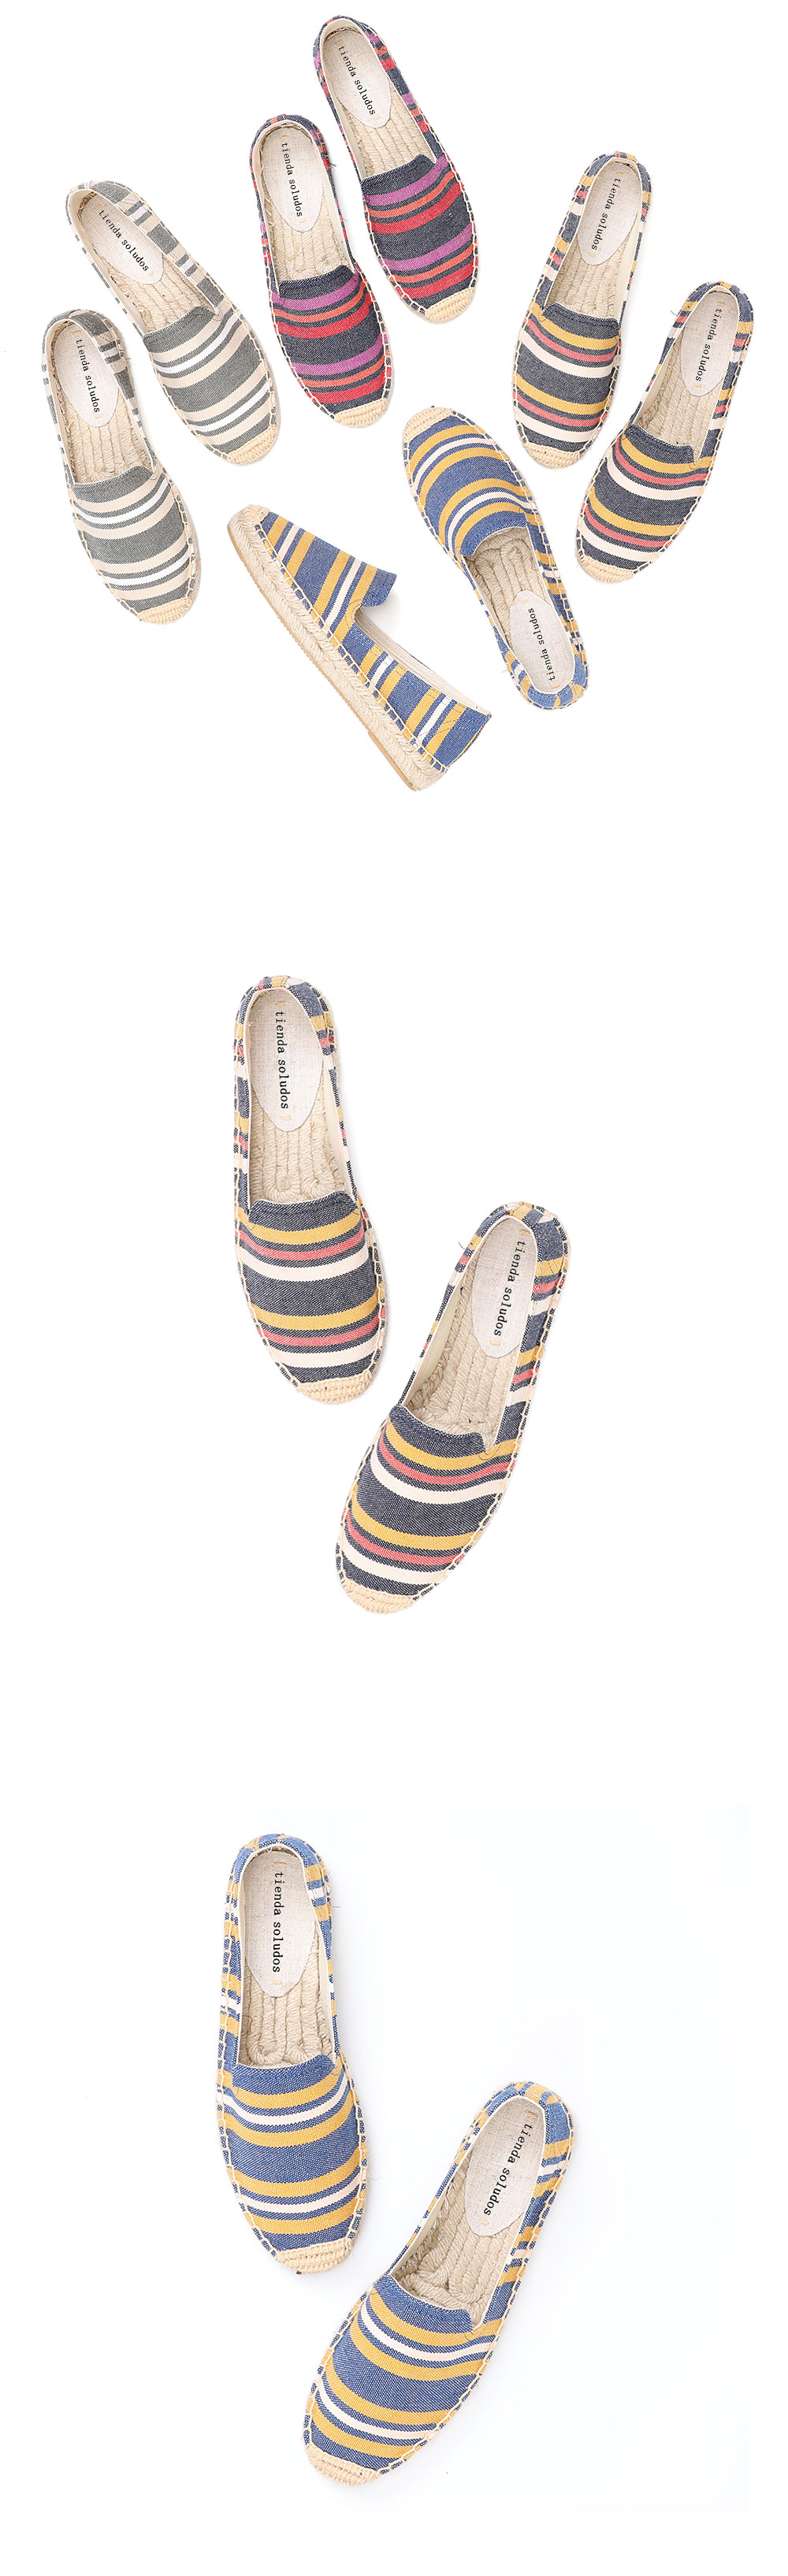 2021 Direct Selling Time-limited Flat Platform Cotton Fabric Rubber Sapatos Zapatillas Mujer Womens Espadrilles Shoes